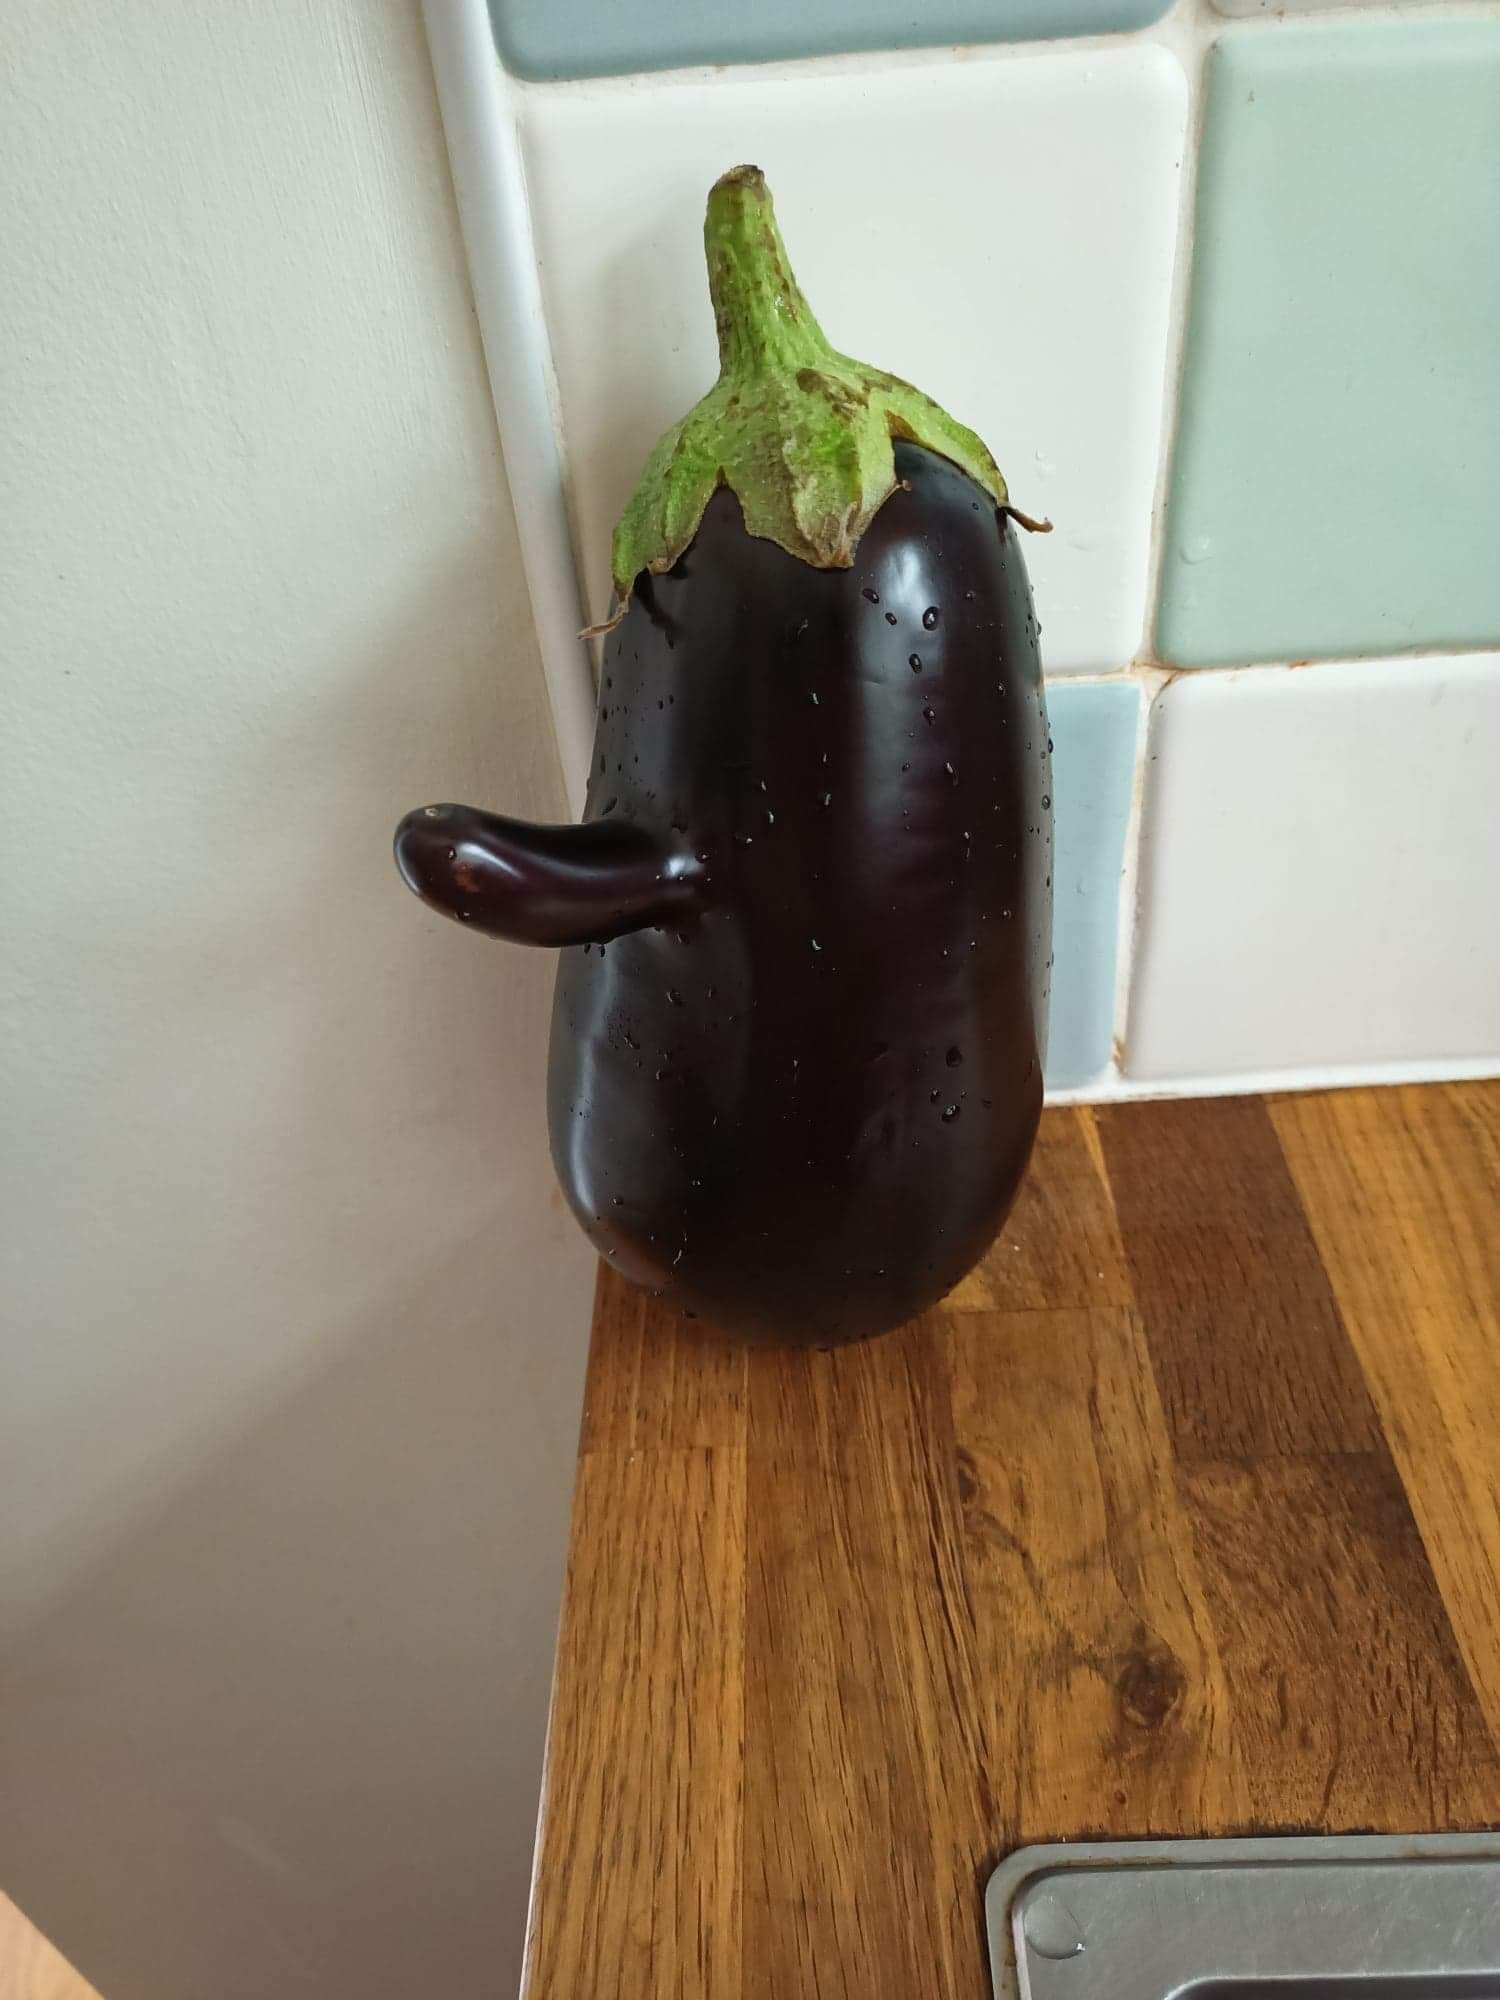 My dad grew this...